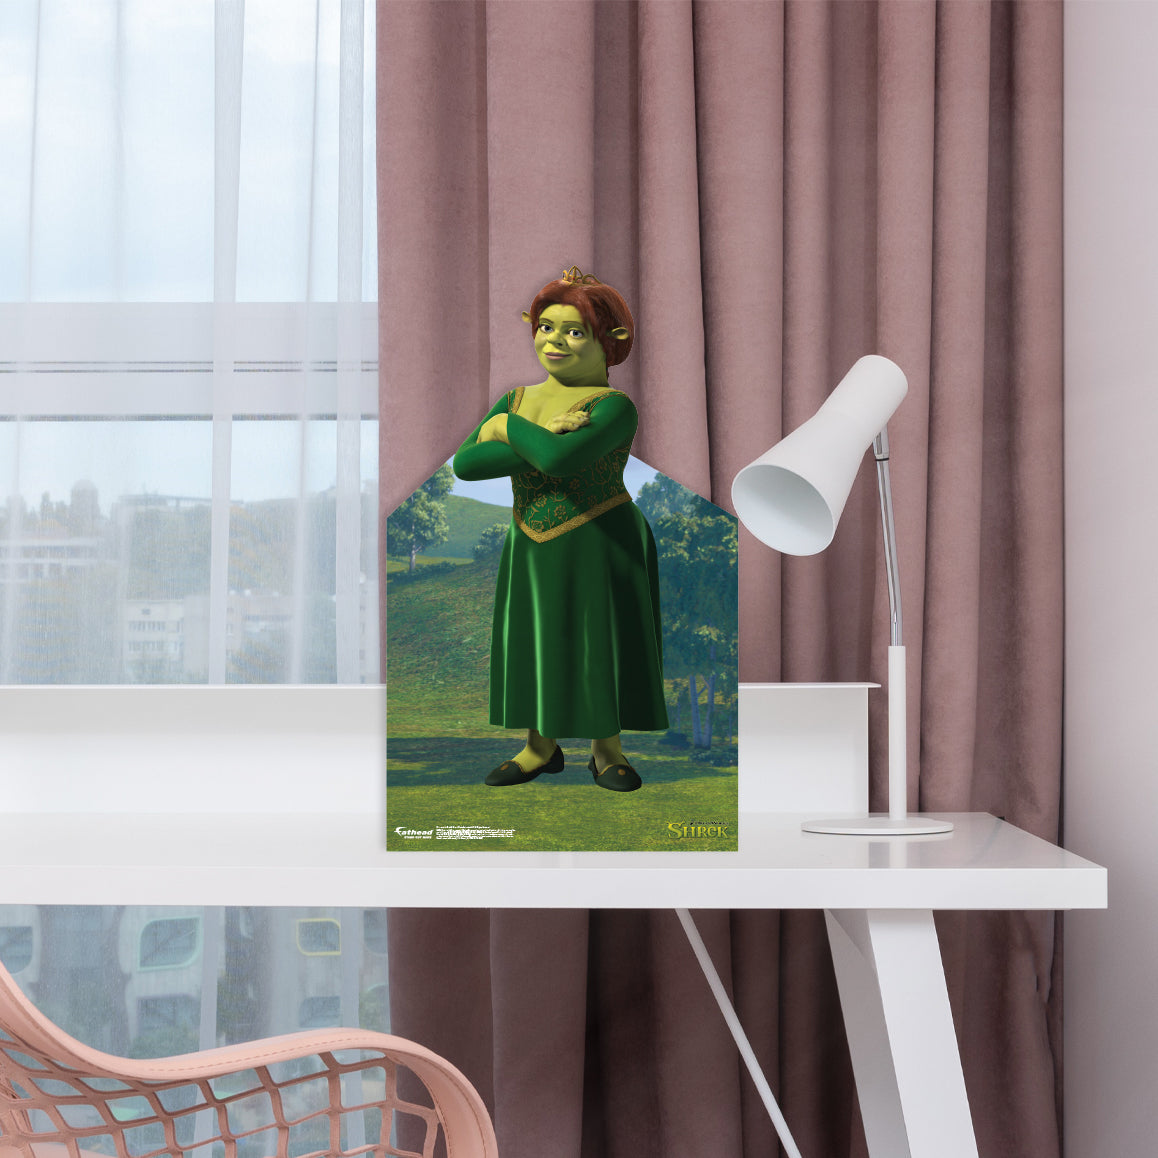 Shrek: Fiona Mini   Cardstock Cutout  - Officially Licensed NBC Universal    Stand Out